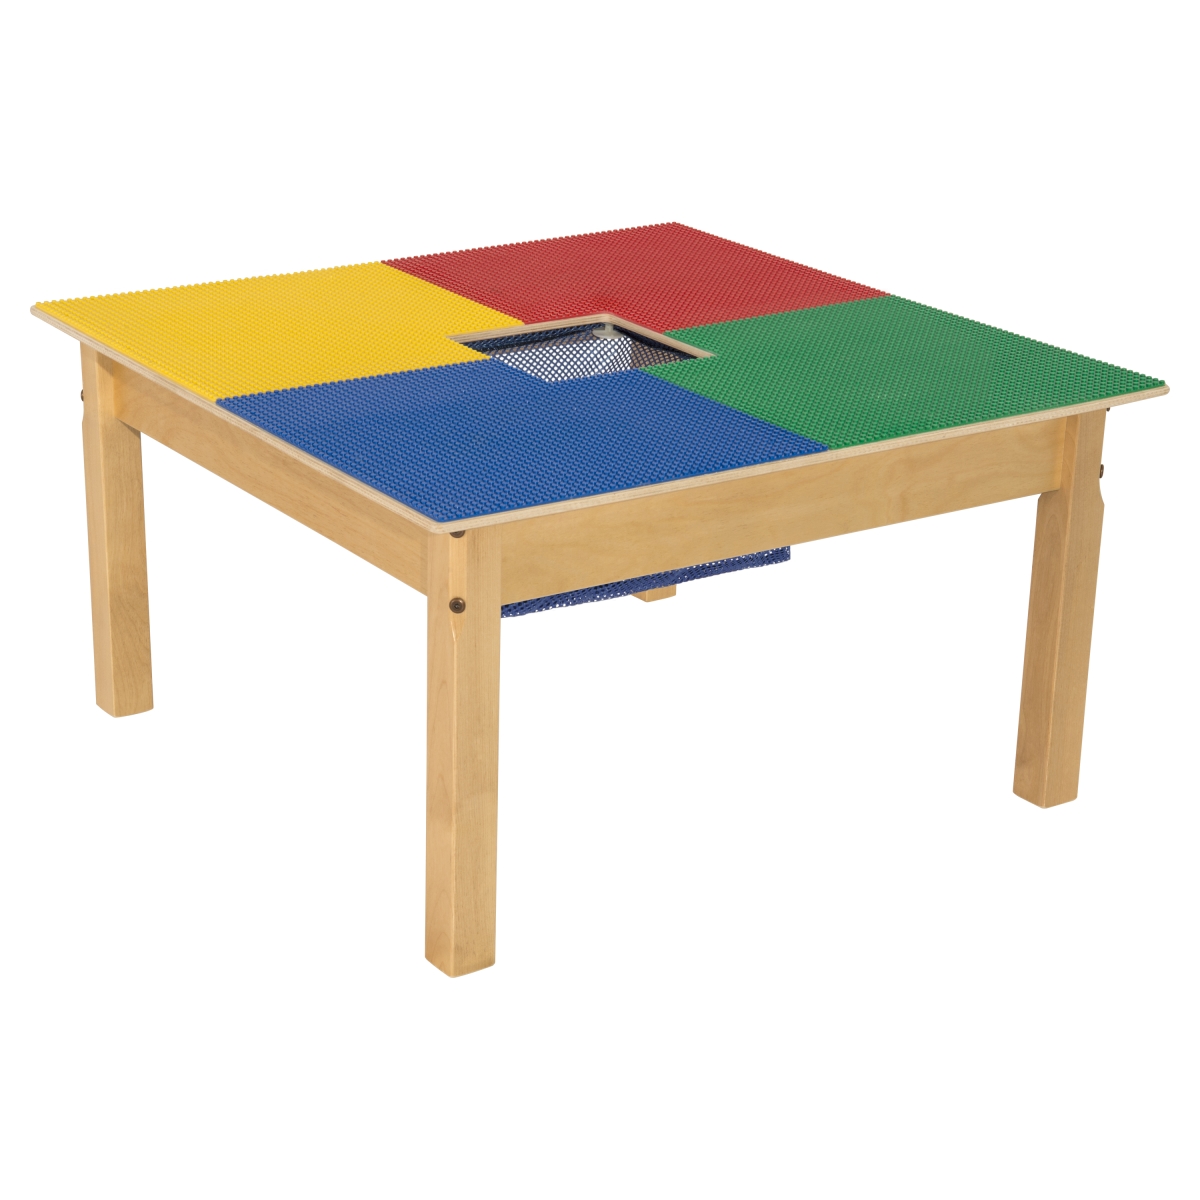 Tp3131sgn16 16 In. Lego Compatible Square Table With Legs, Multi Color